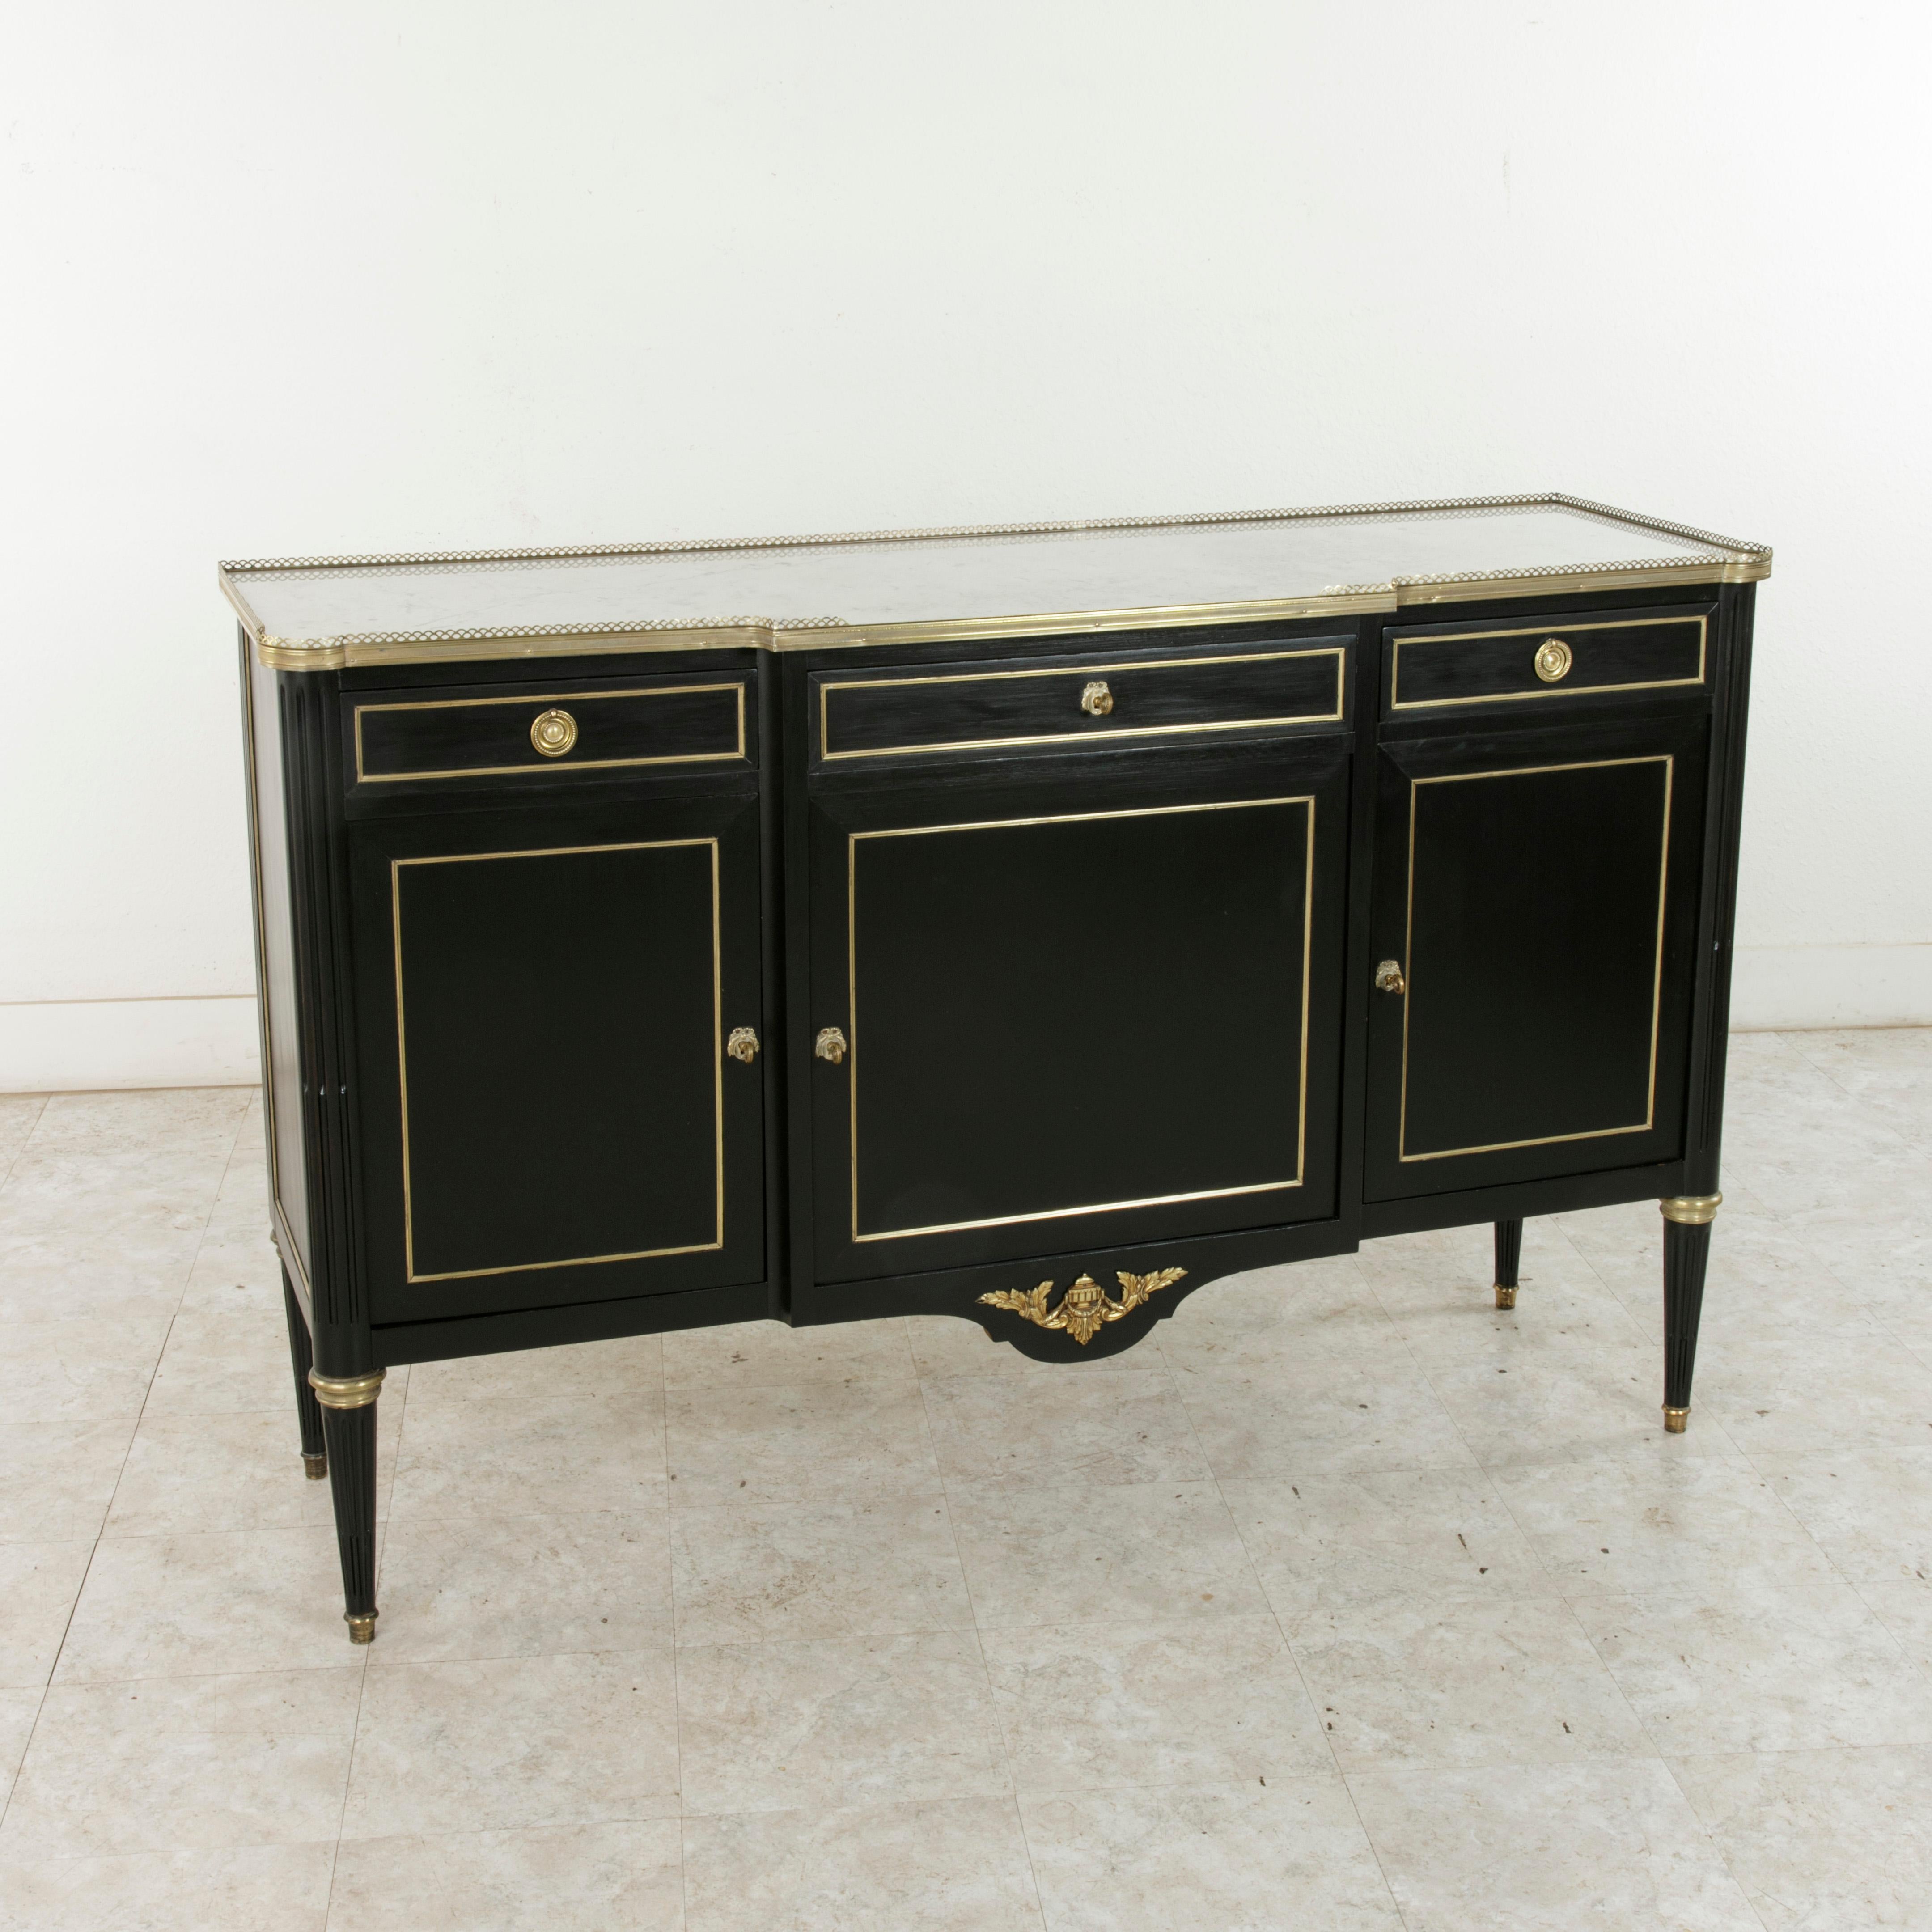 This French Louis XVI style enfilade or sideboard from the mid-20th century features an ebonized mahogany facade with a white marble top. Bronze trim frames the door and drawer panels as well as the side panels, and a bronze gallery surrounds the